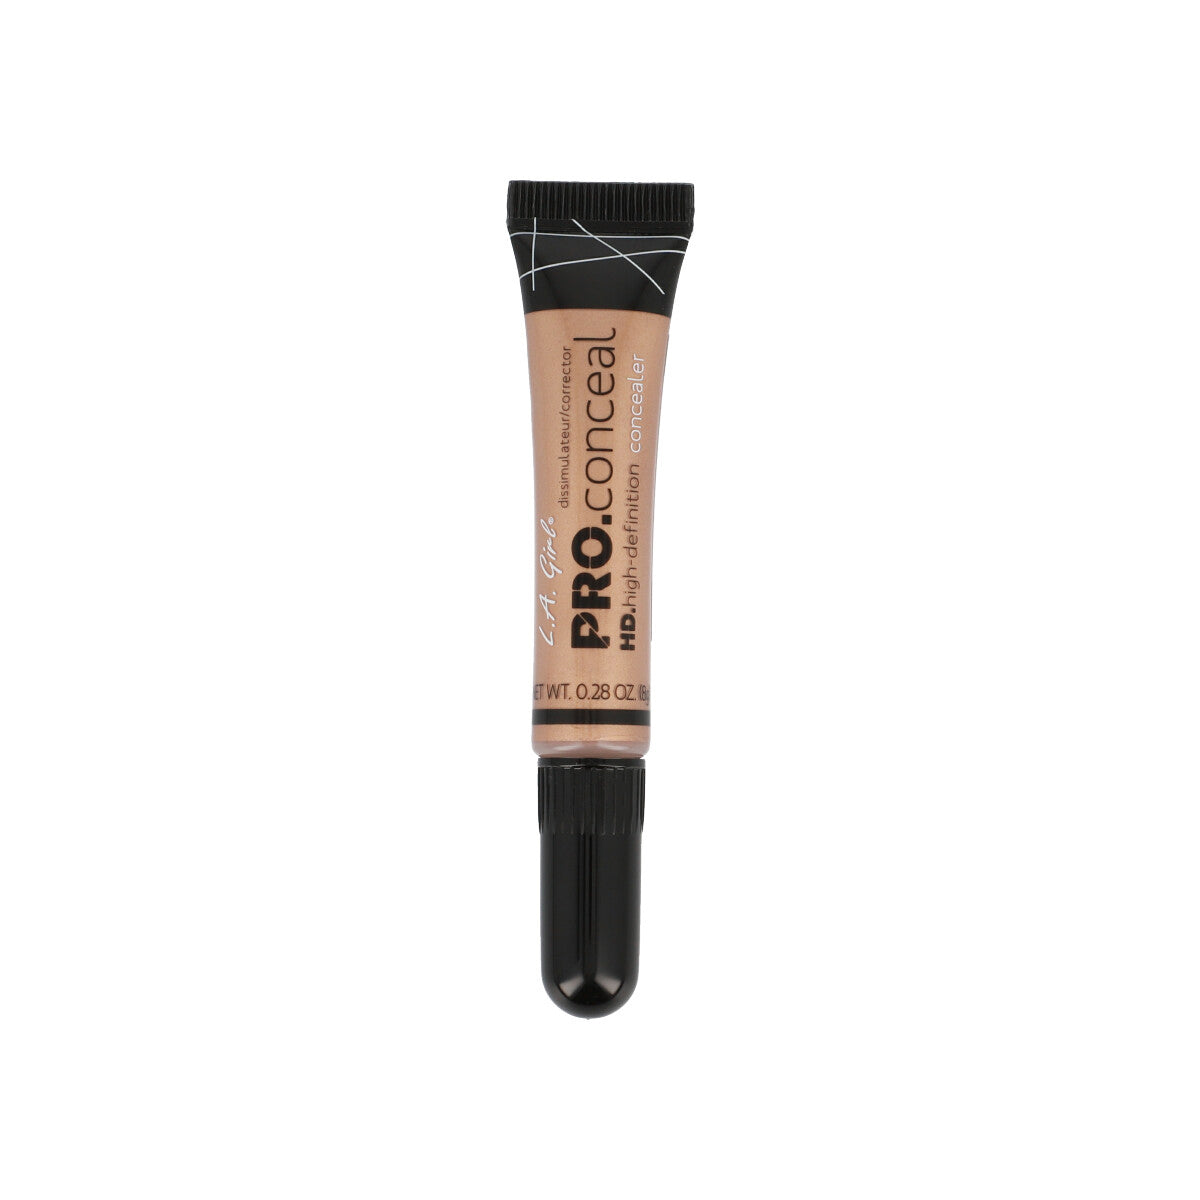 HD PRO. Conceal Champagne Highlighter